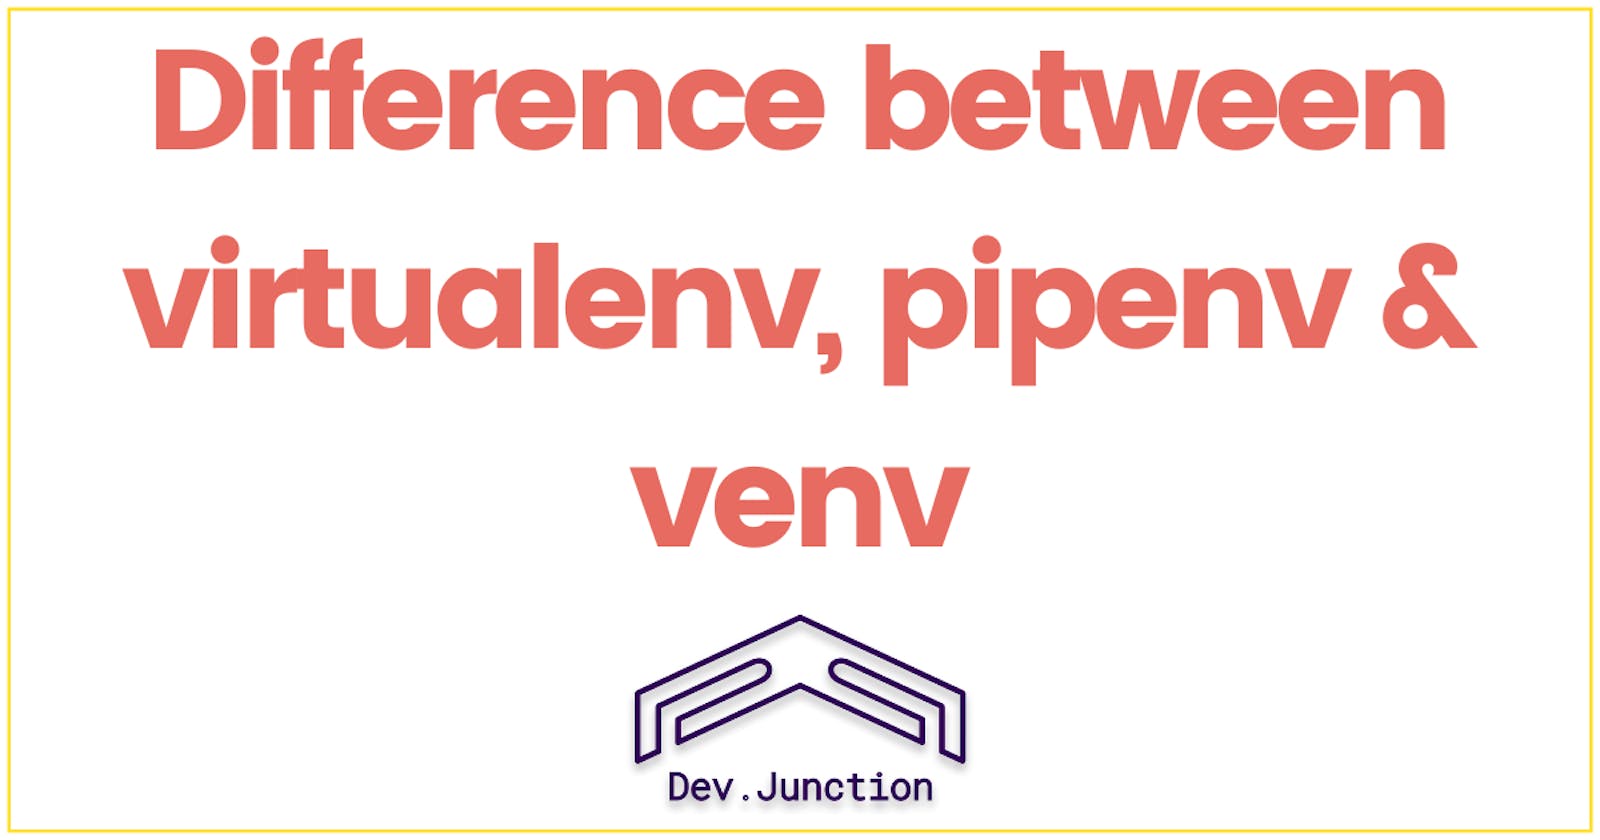 What is the difference between virtualenv, pipenv & venv?